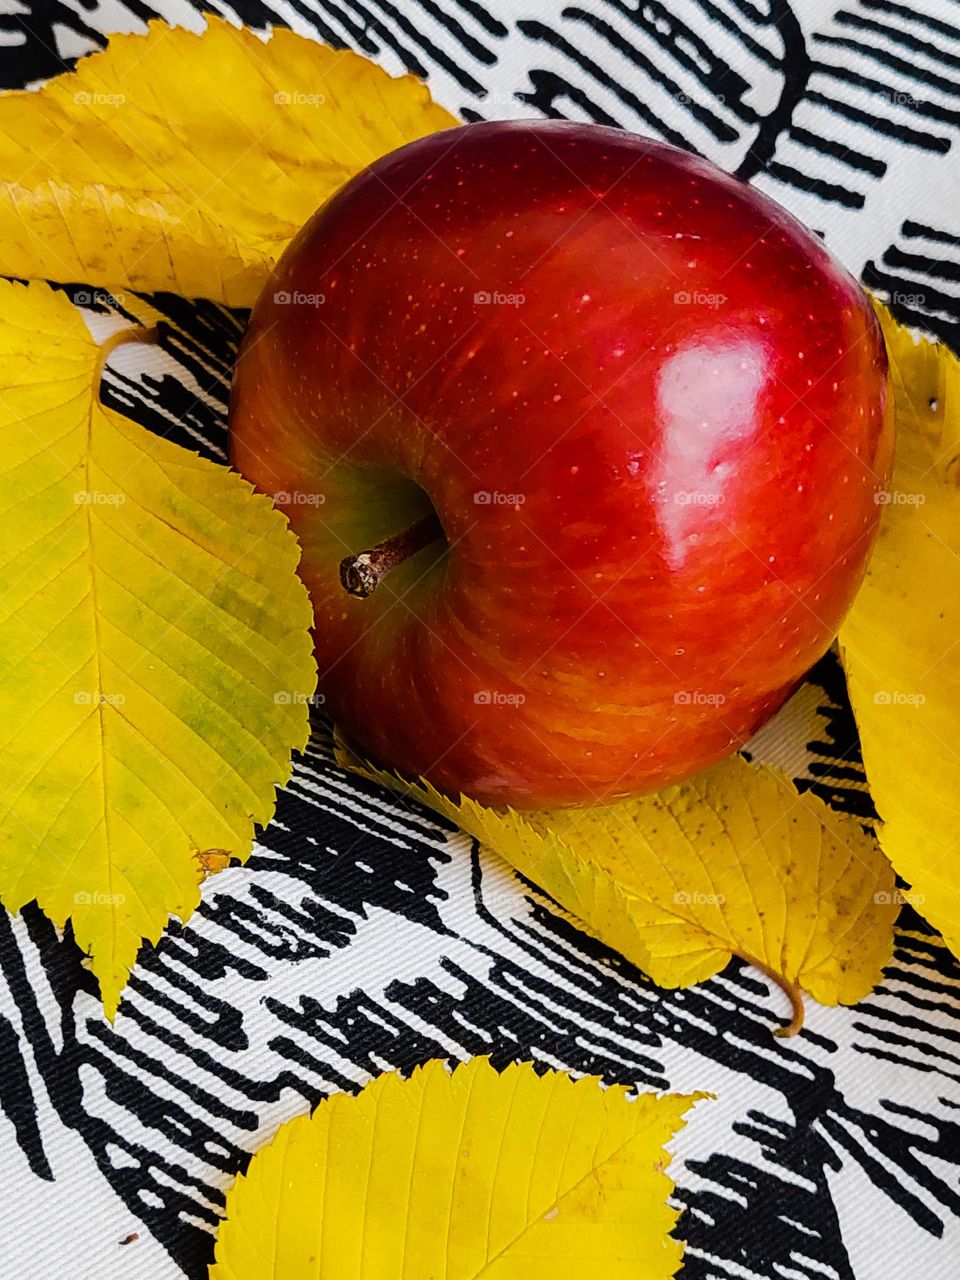 Close up of organic red apple and yellow fallen leaves